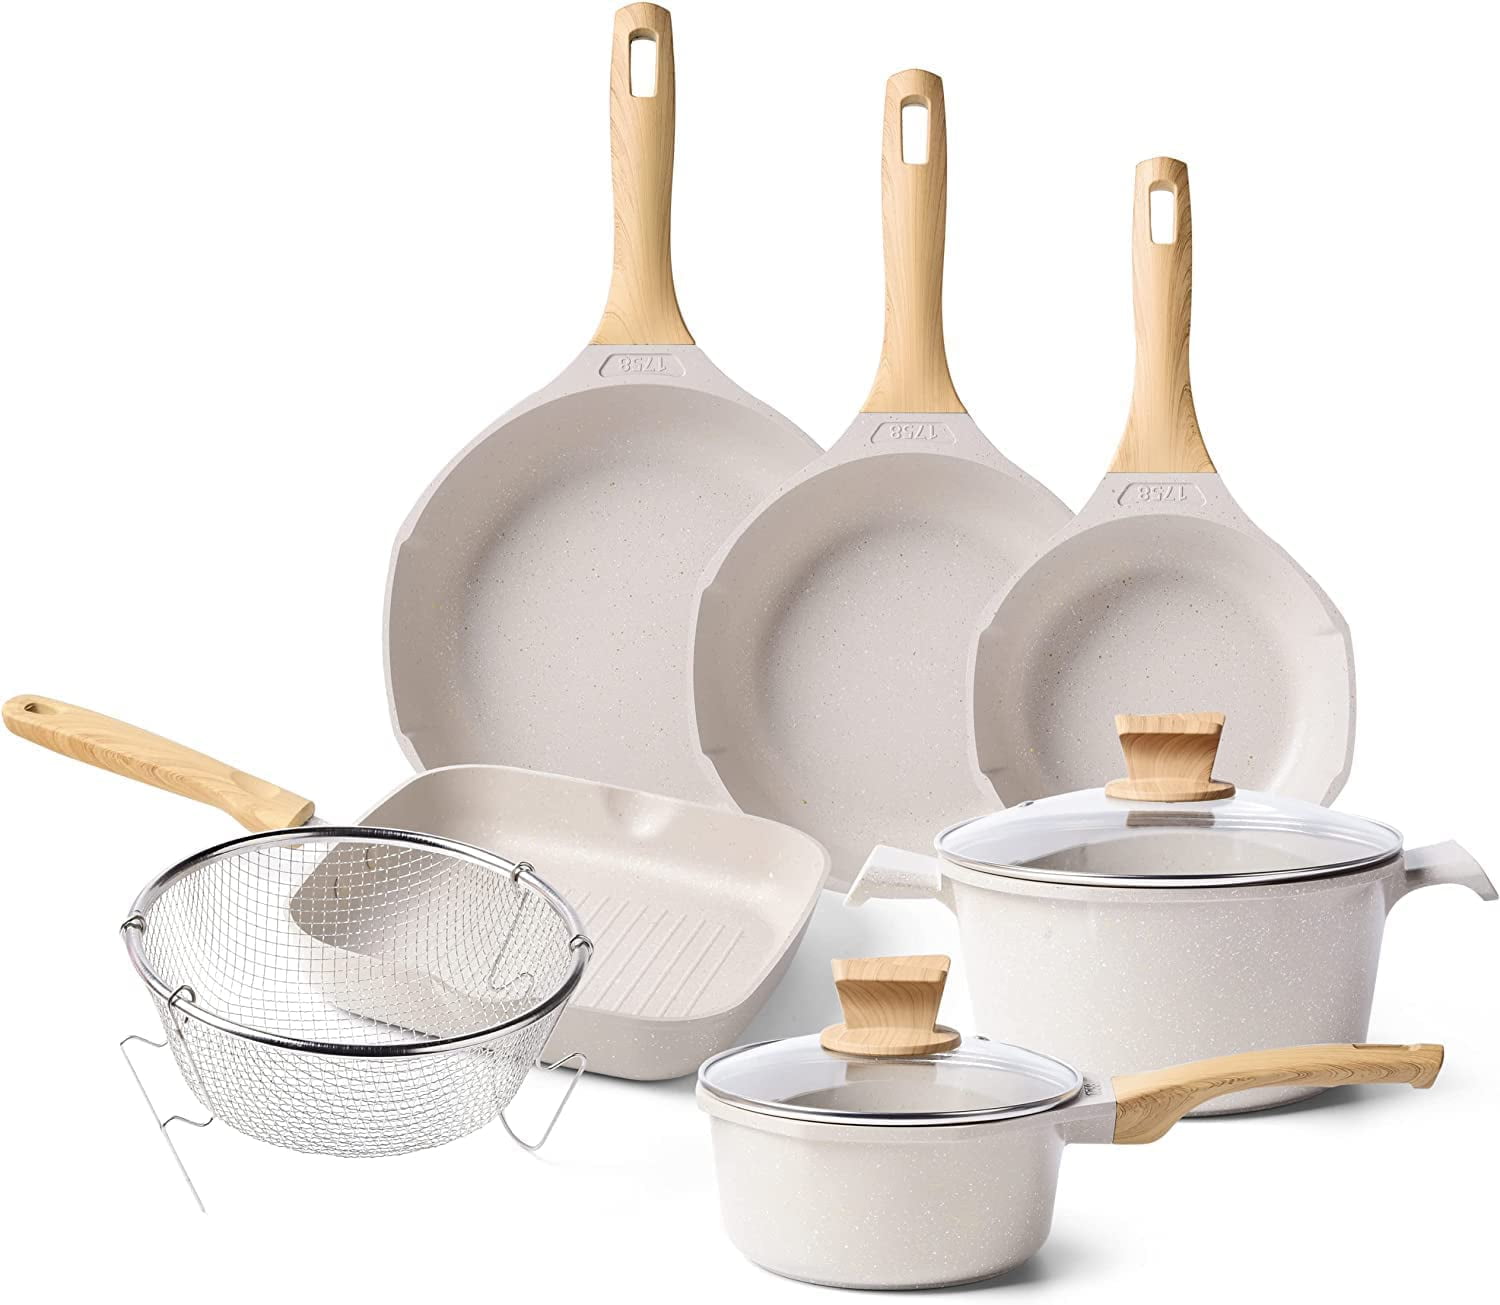 Pots and Pans Set - Ga HOMEFAVOR Kitchen Nonstick Cookware Sets ,Granite  for Frying and Cooking Marble Stone Kitchen Essentials 10 Piece Set (Beige)